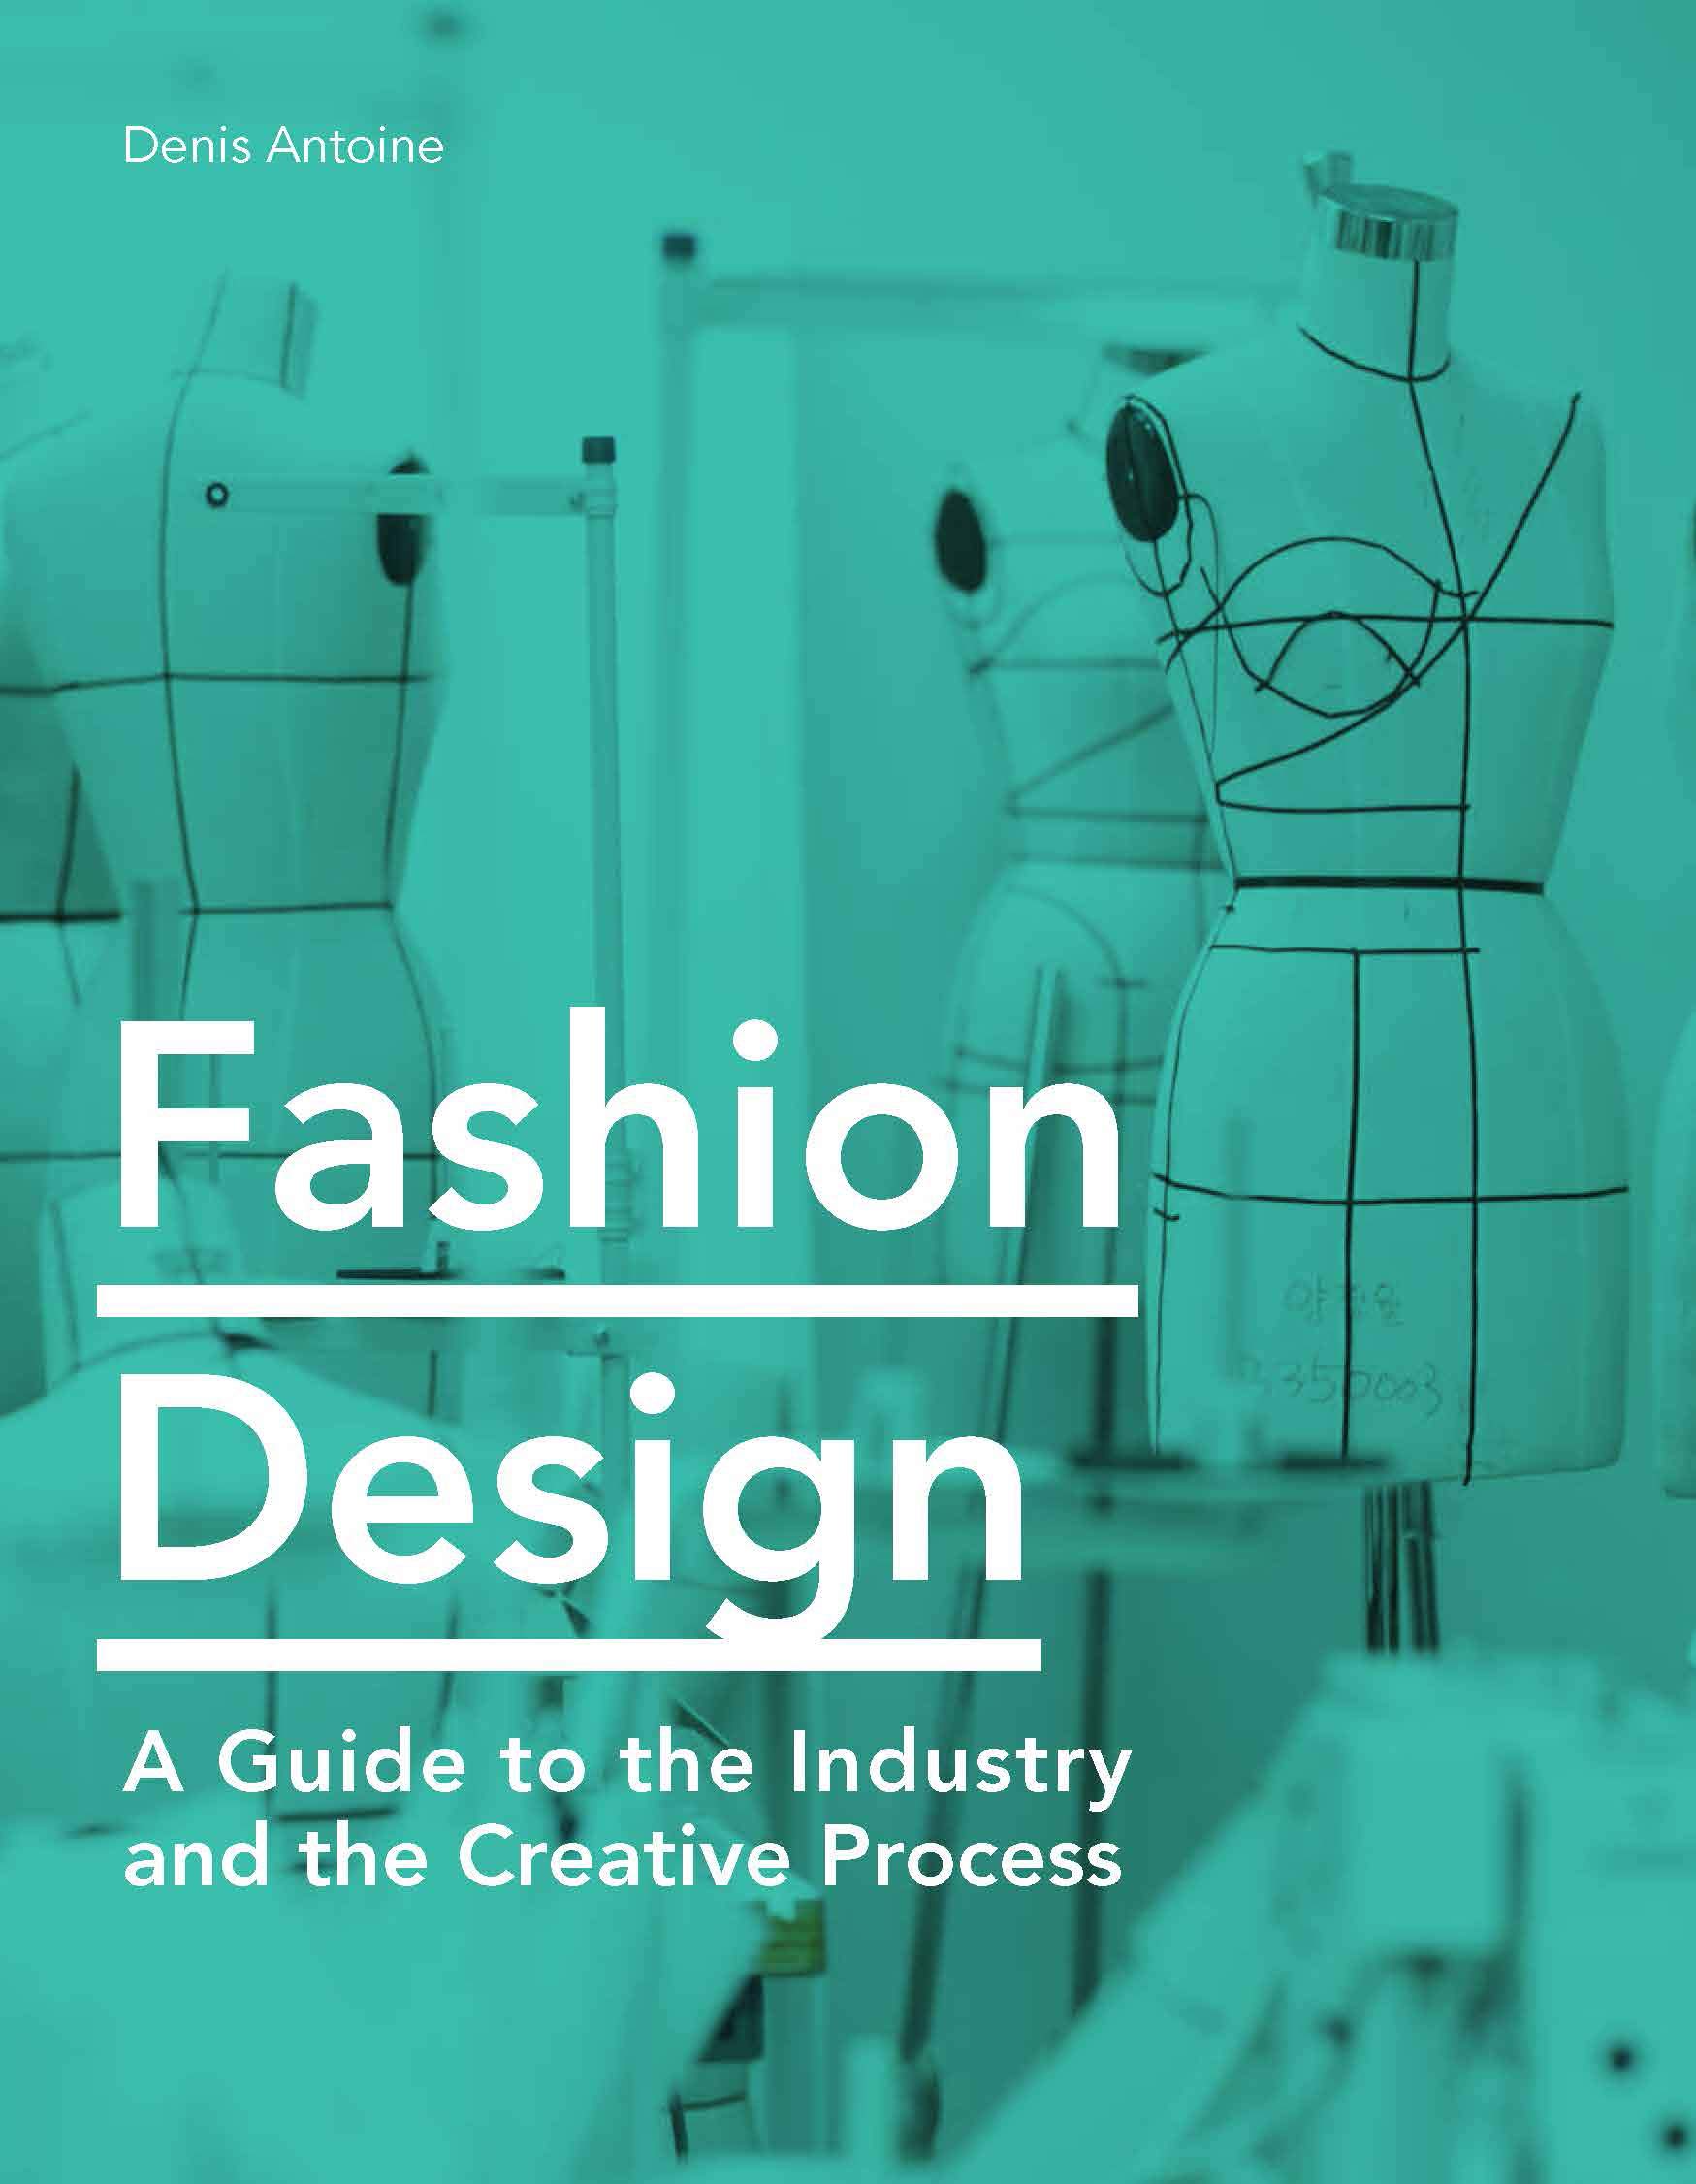 Fashion Design: A Guide to the Industry and the Creative Process | Papercut